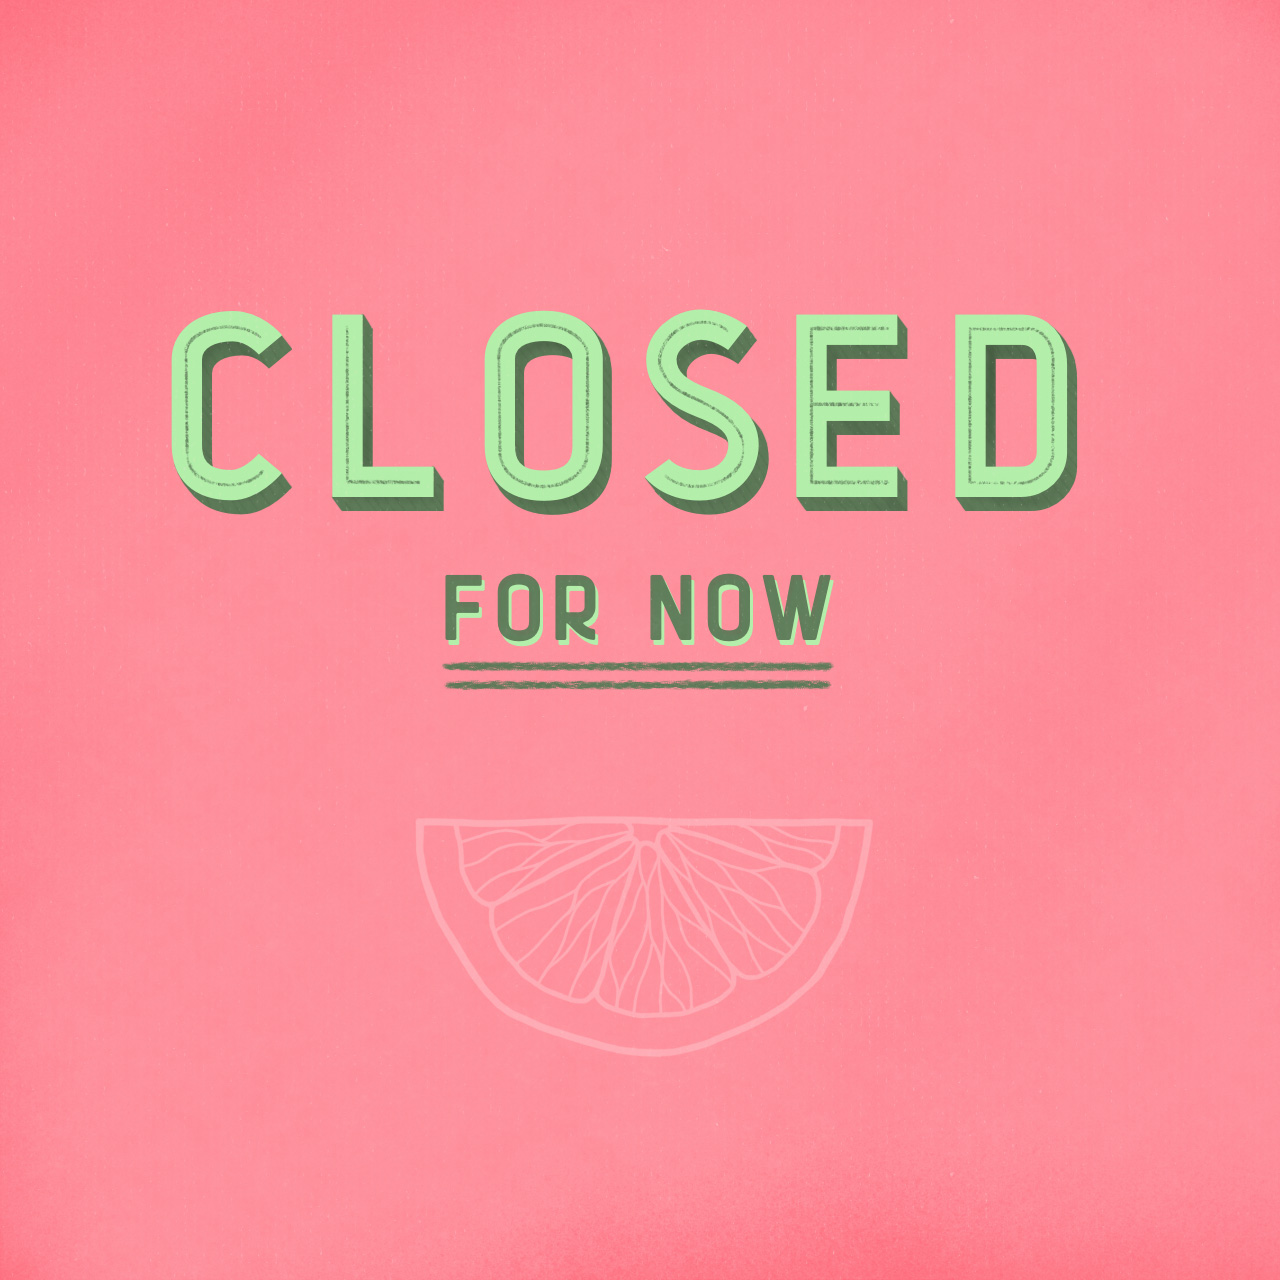 Green text on pink background. The text reads: Closed - for now